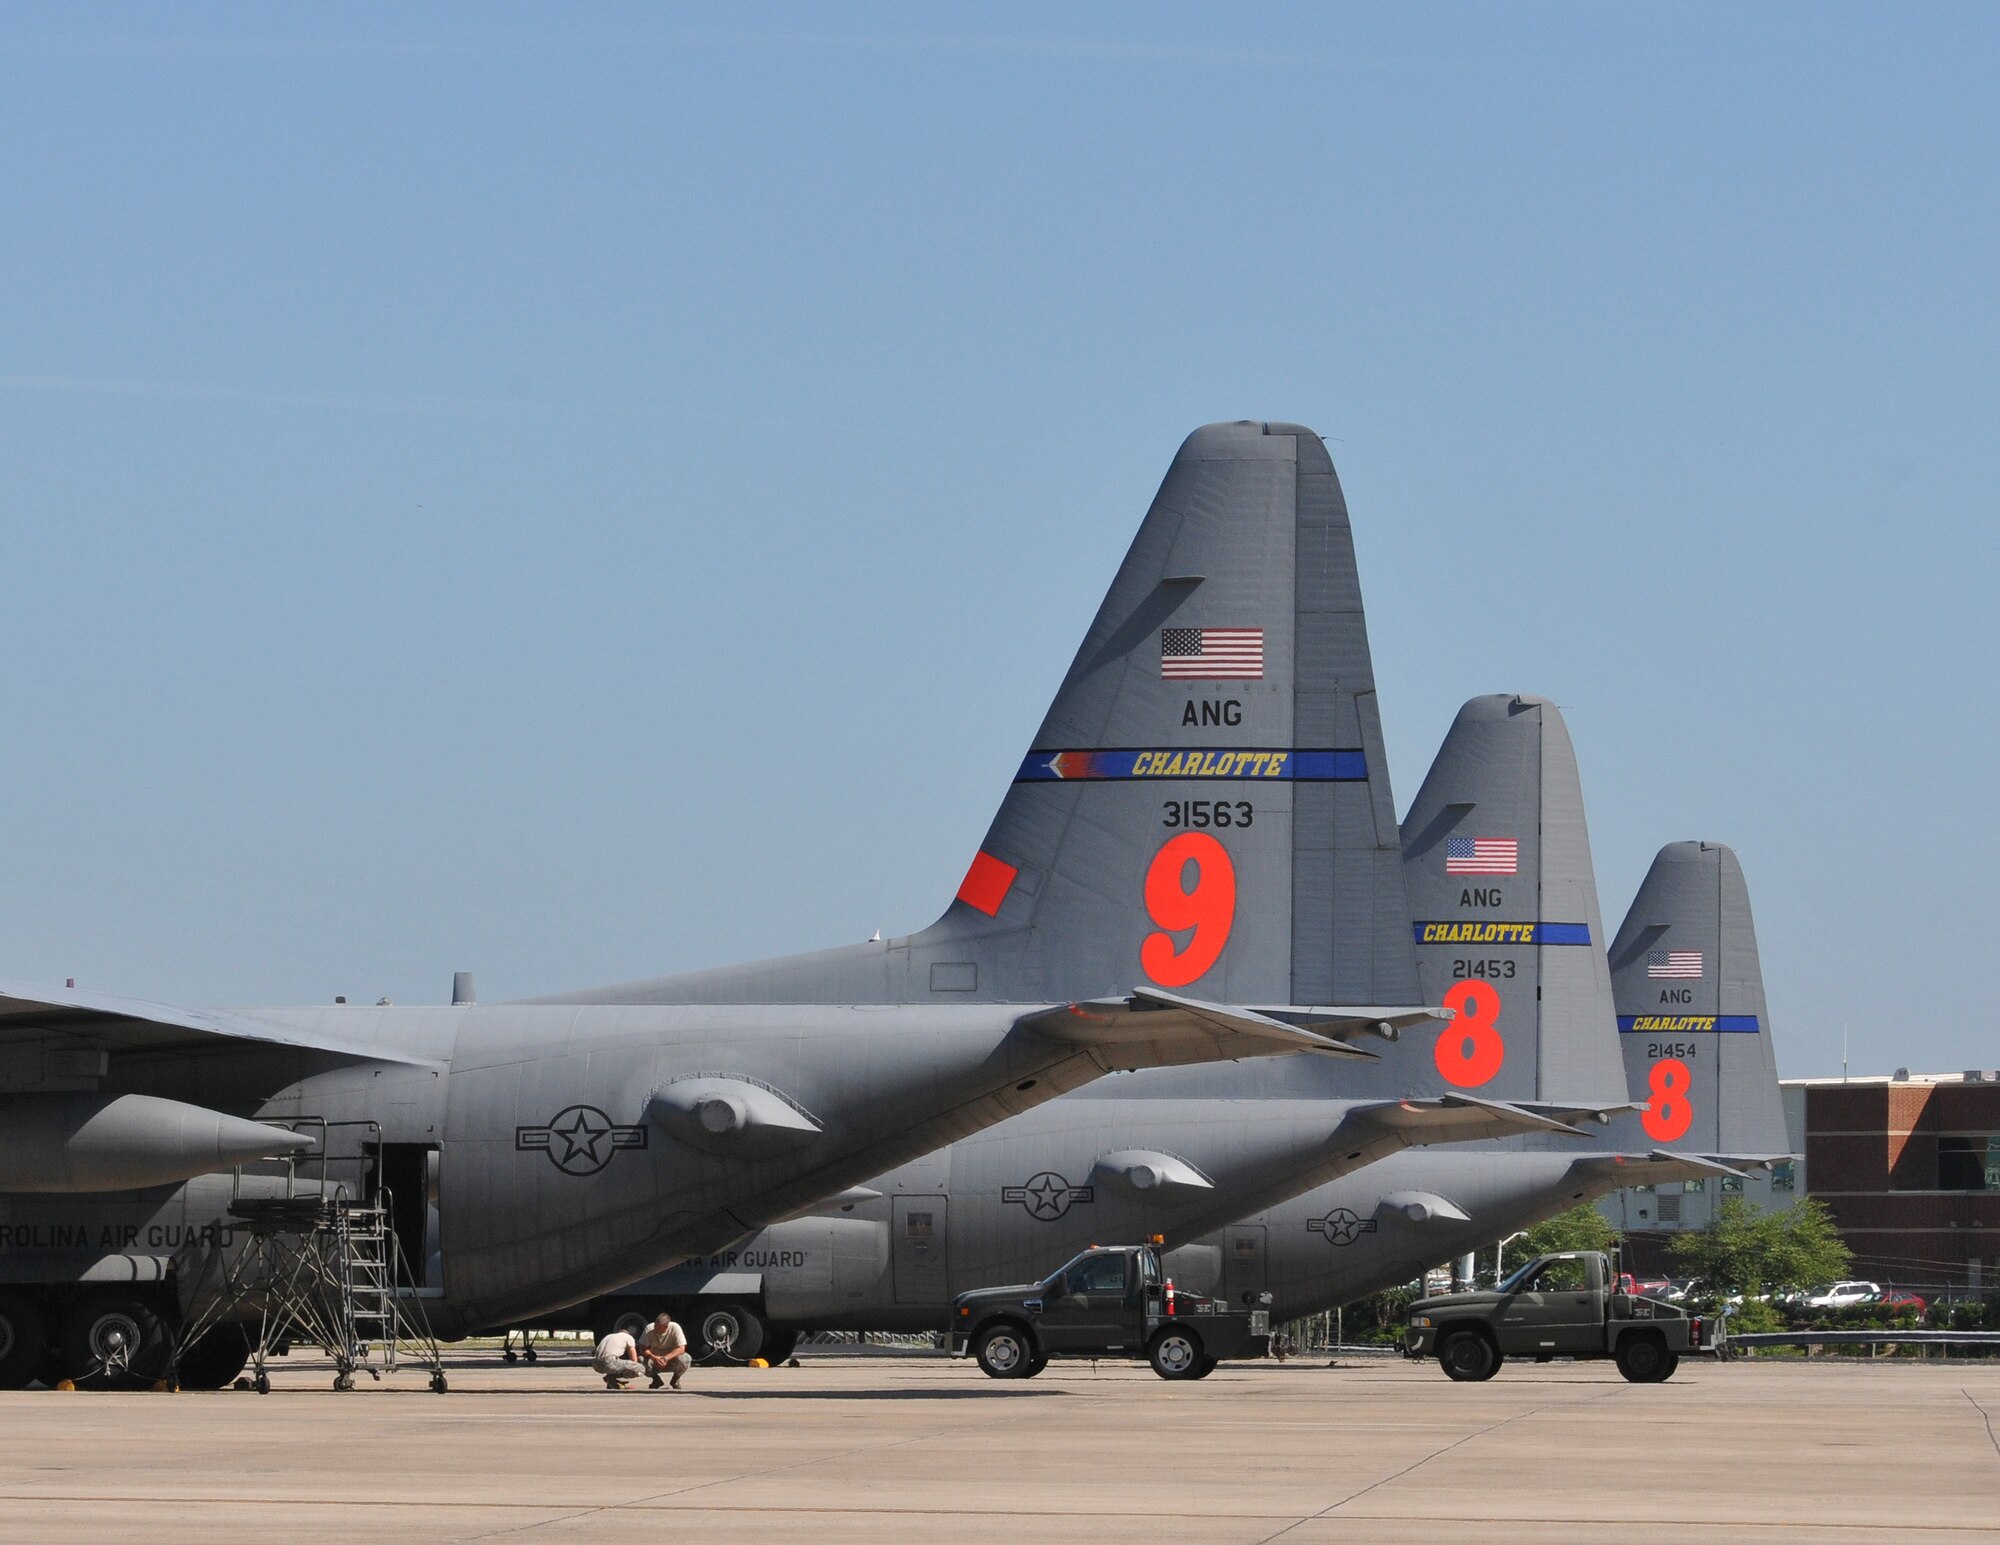 Airmen from the 145th Maintenance Squadron, North Carolina Air National Guard, keep C-130 Hercules aircraft maintained and prepared to be mission ready at a moment’s notice.  On July 16, 2013, two 145th Airlift Wing C-130 aircraft equipped with Modular Airborne Fire Fighting Systems (MAFFS 8 and 9) are standing by ready to help U.S. Forest Service and firefighters save lives and property.  All C-130 aircraft, including the spare MAFFS 8, are maintained at the North Carolina Air National Guard Base, Charlotte-Douglas Intl. Airport. (U.S. Air National Guard photo by Master Sgt. Patricia Moran, 145th Public Affairs/Released)